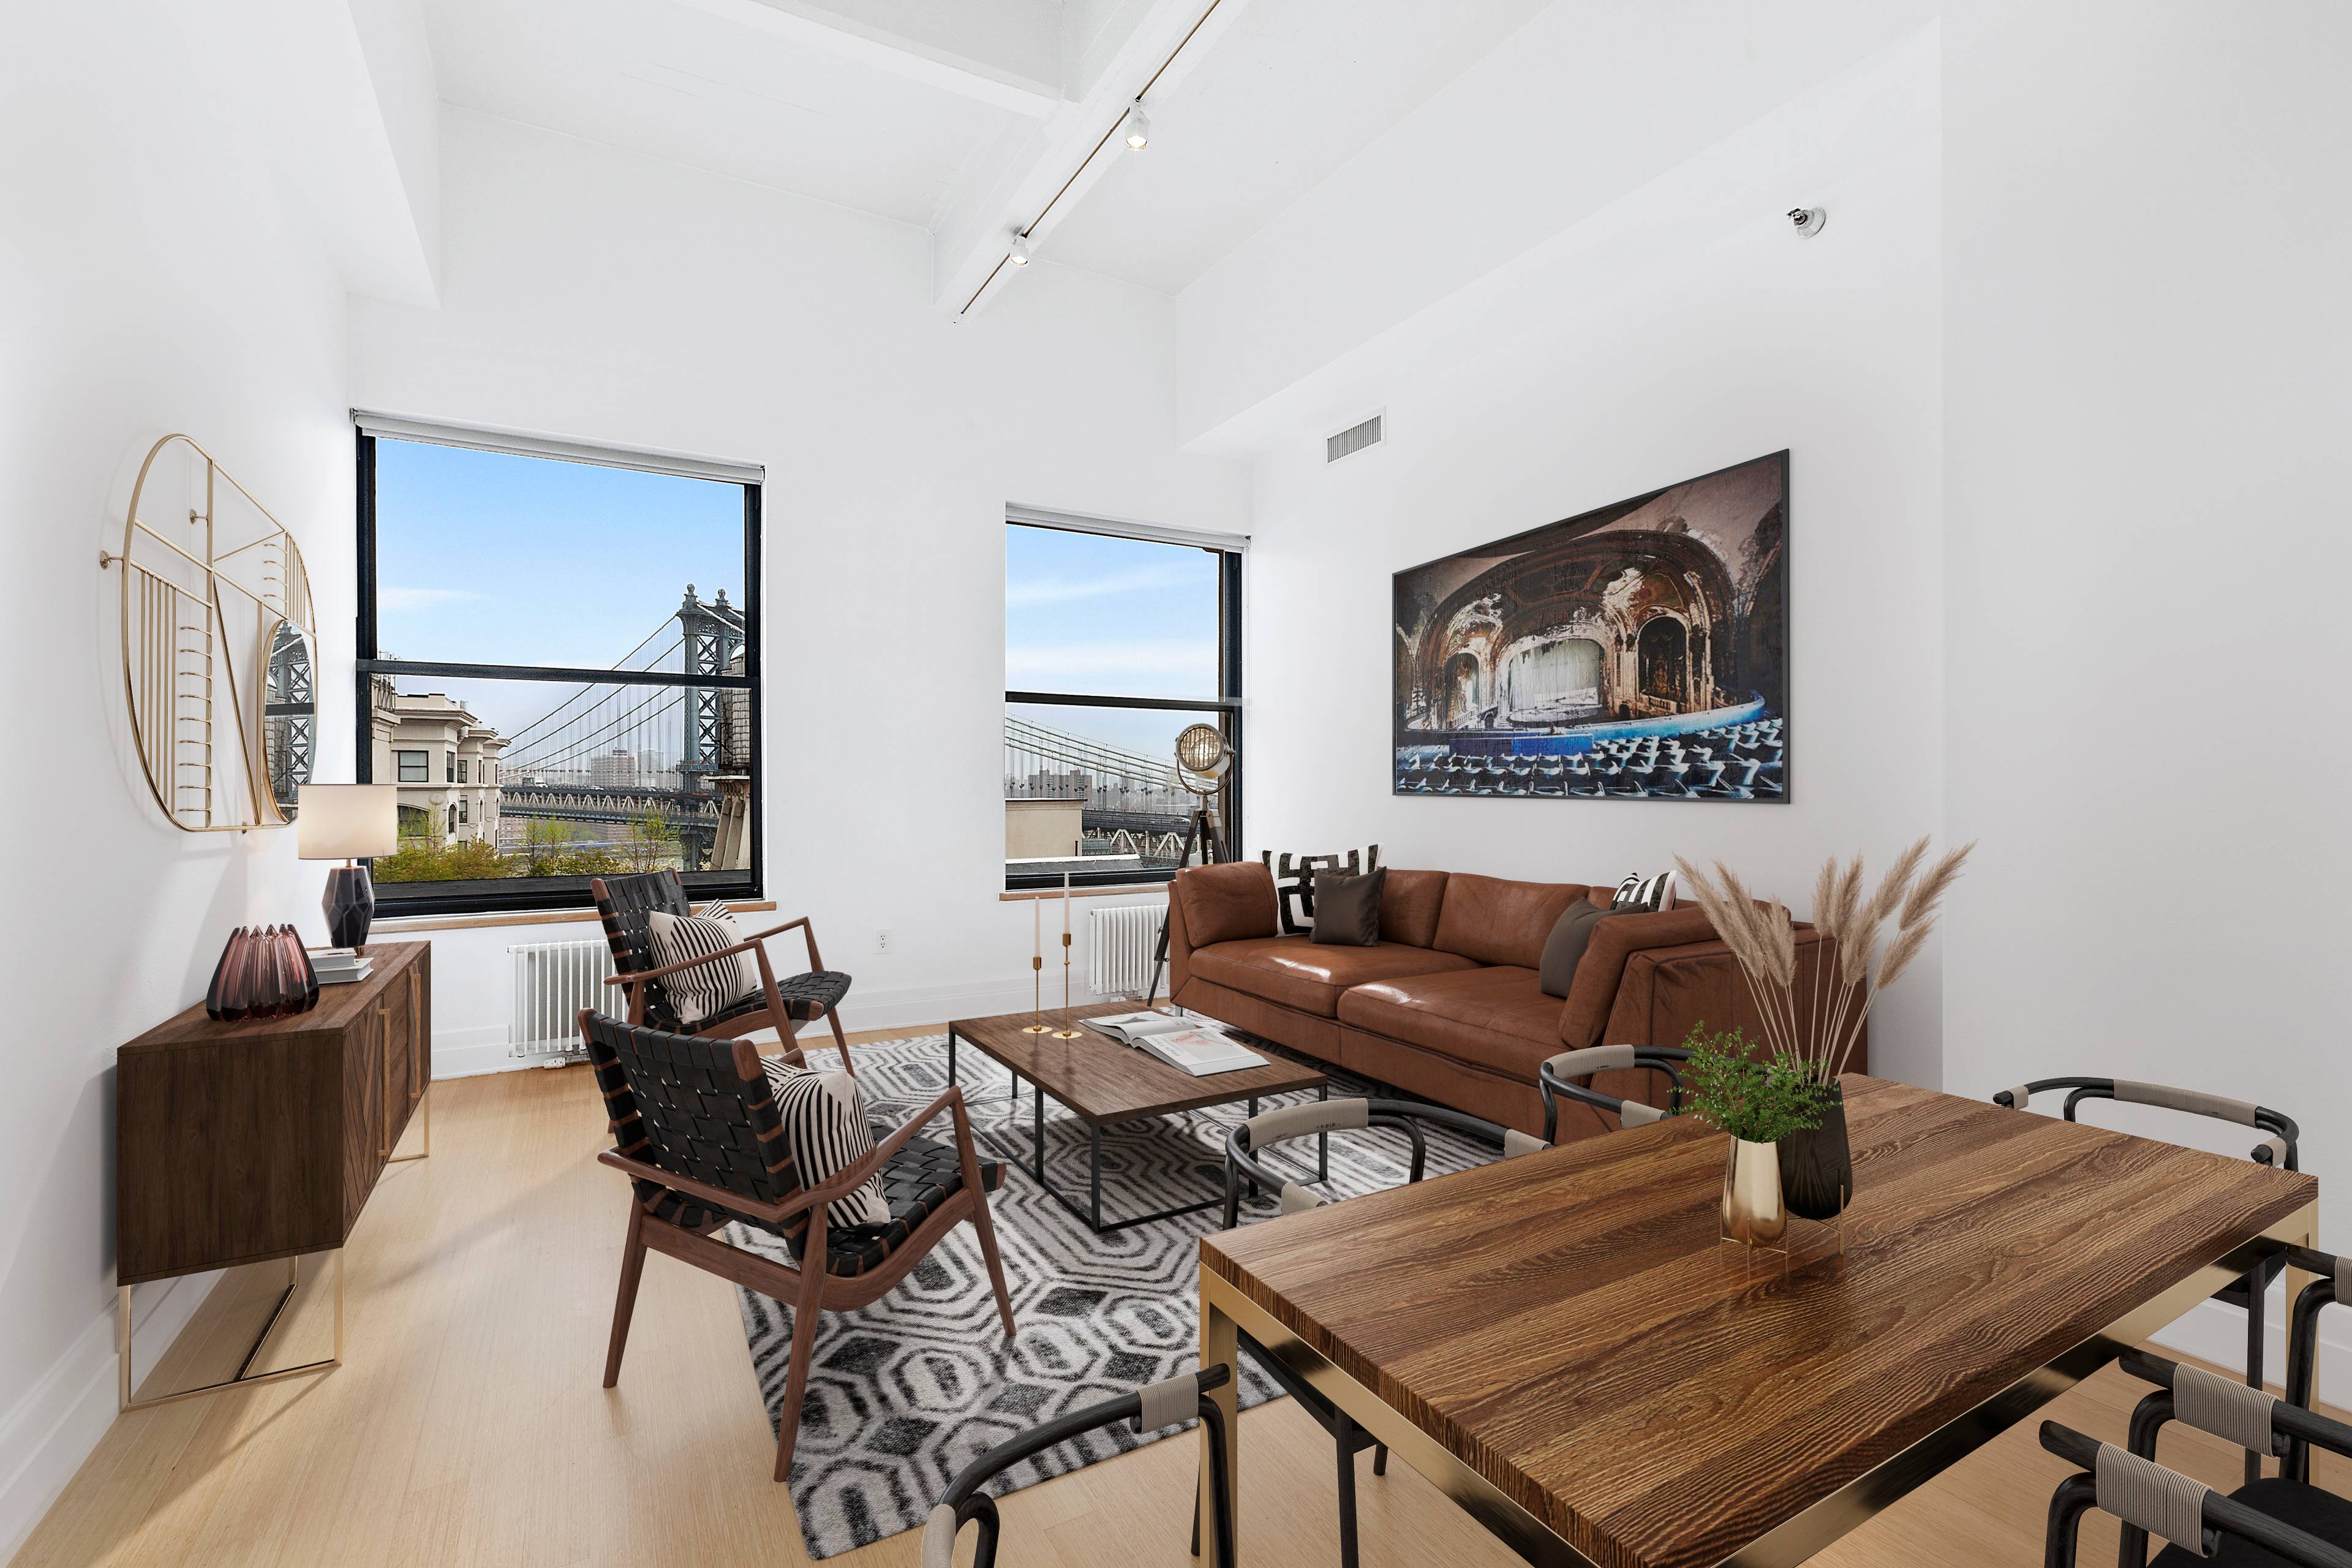 Welcome to Residence 12P at 70 Washington Street in the heart of DUMBO, Brooklyn.